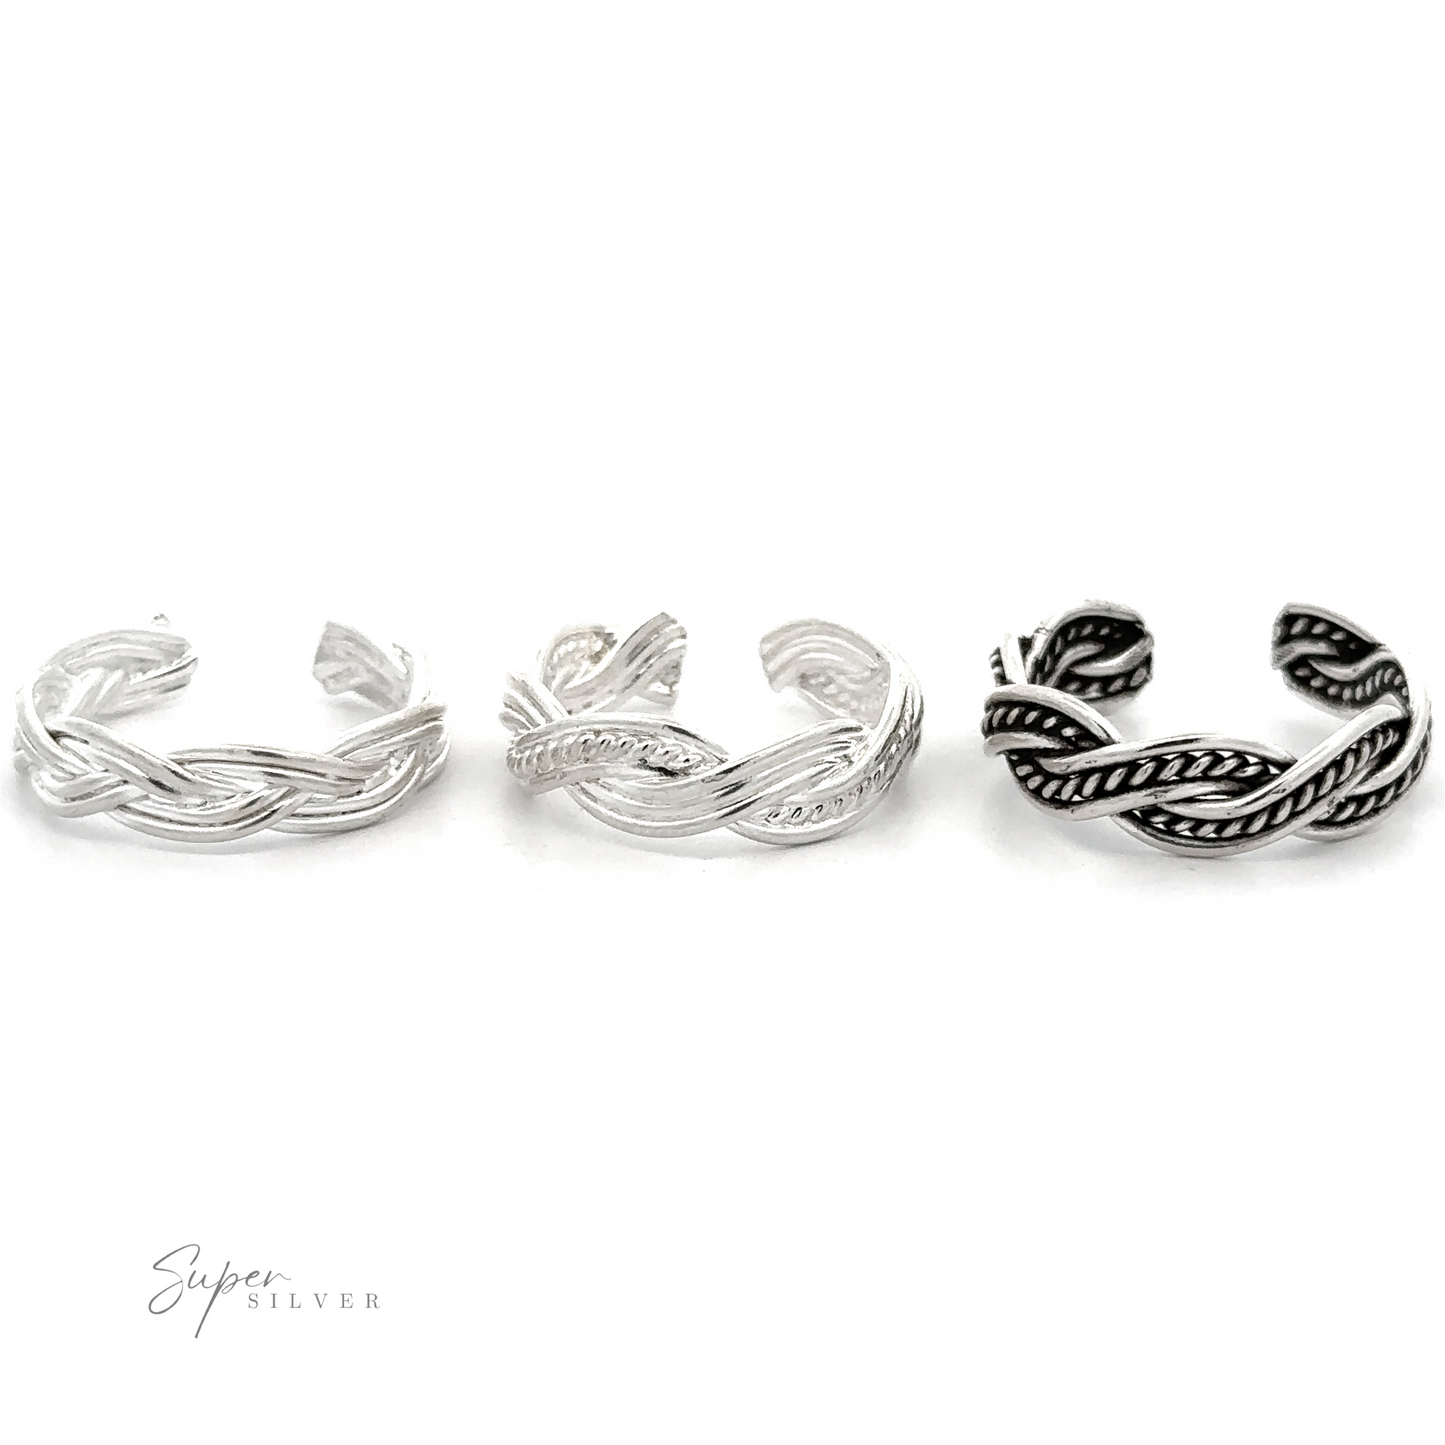 Three Various Braided Adjustable Toe Rings with intricate designs on a white background.